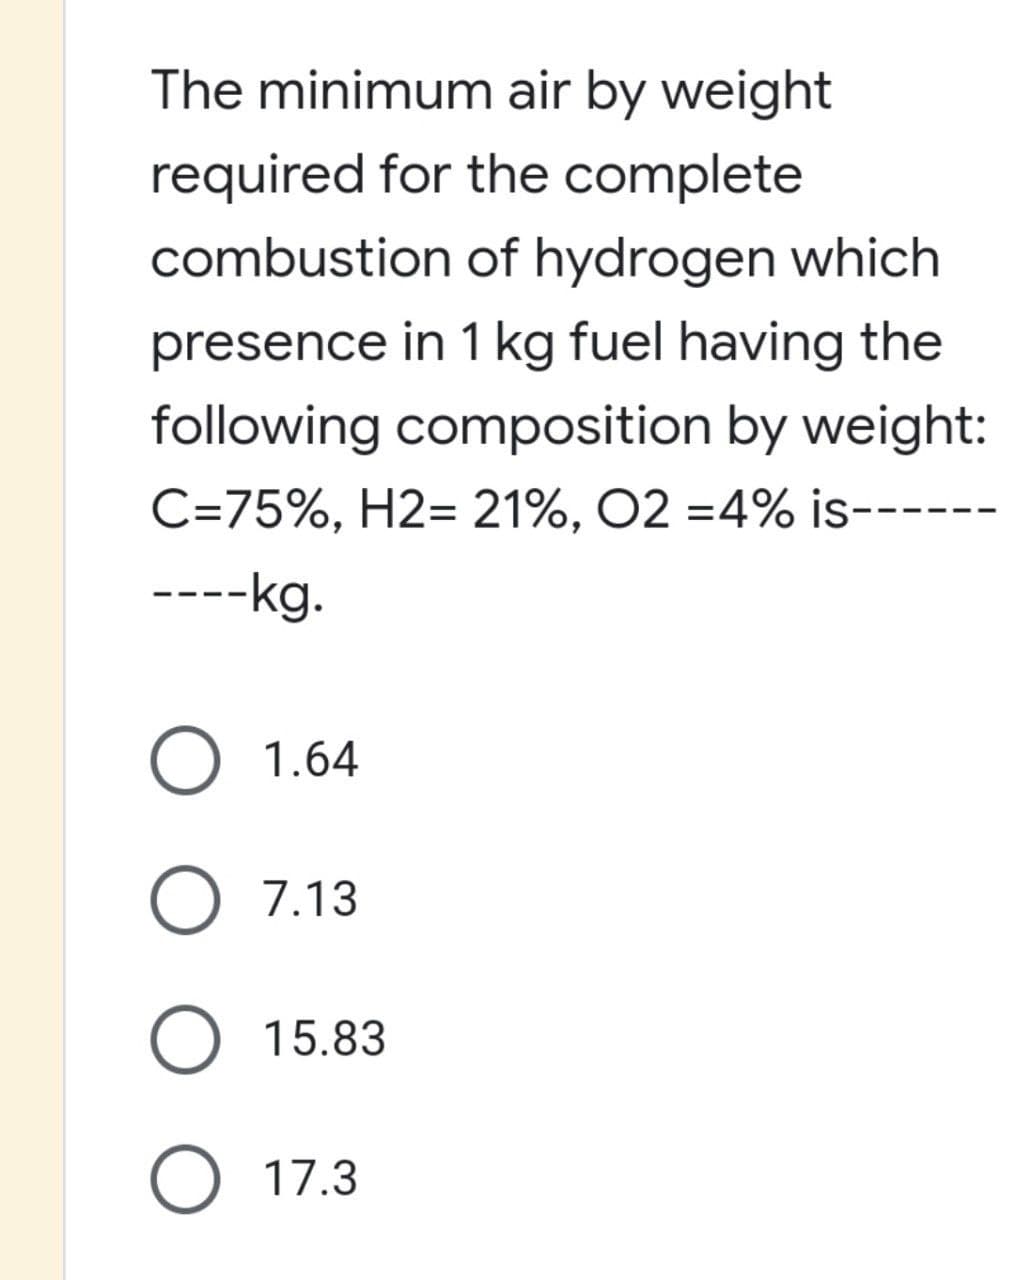 The minimum air by weight
required for the complete
combustion of hydrogen which
presence in 1 kg fuel having the
following composition by weight:
C=75%, H2= 21%, O2 = 4% is--
----kg.
O 1.64
O 7.13
O 17.3
15.83